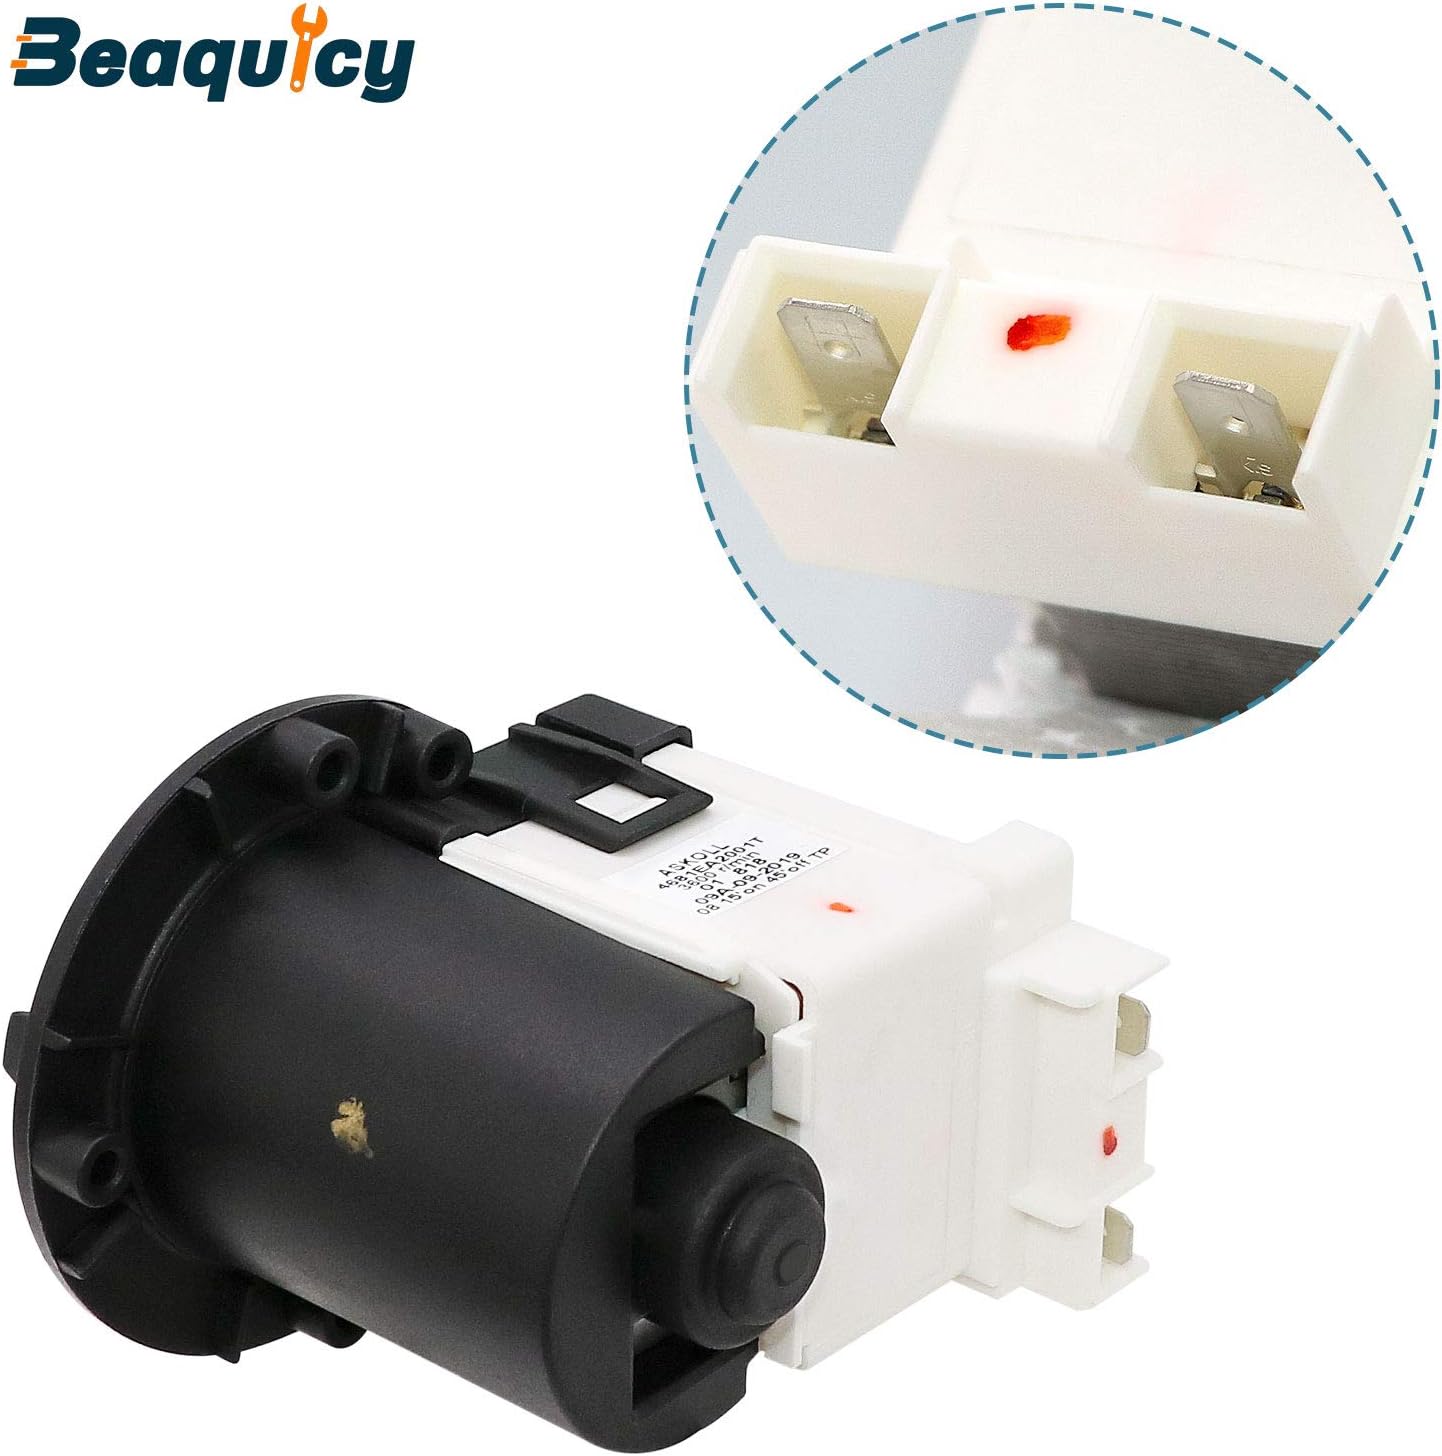 Beaquicy 4681EA2001T Washer Drain Pump Motor  - Replacement part for Ken-more and L-G Washing Machine (OEM 4681EA2001T Original Version)